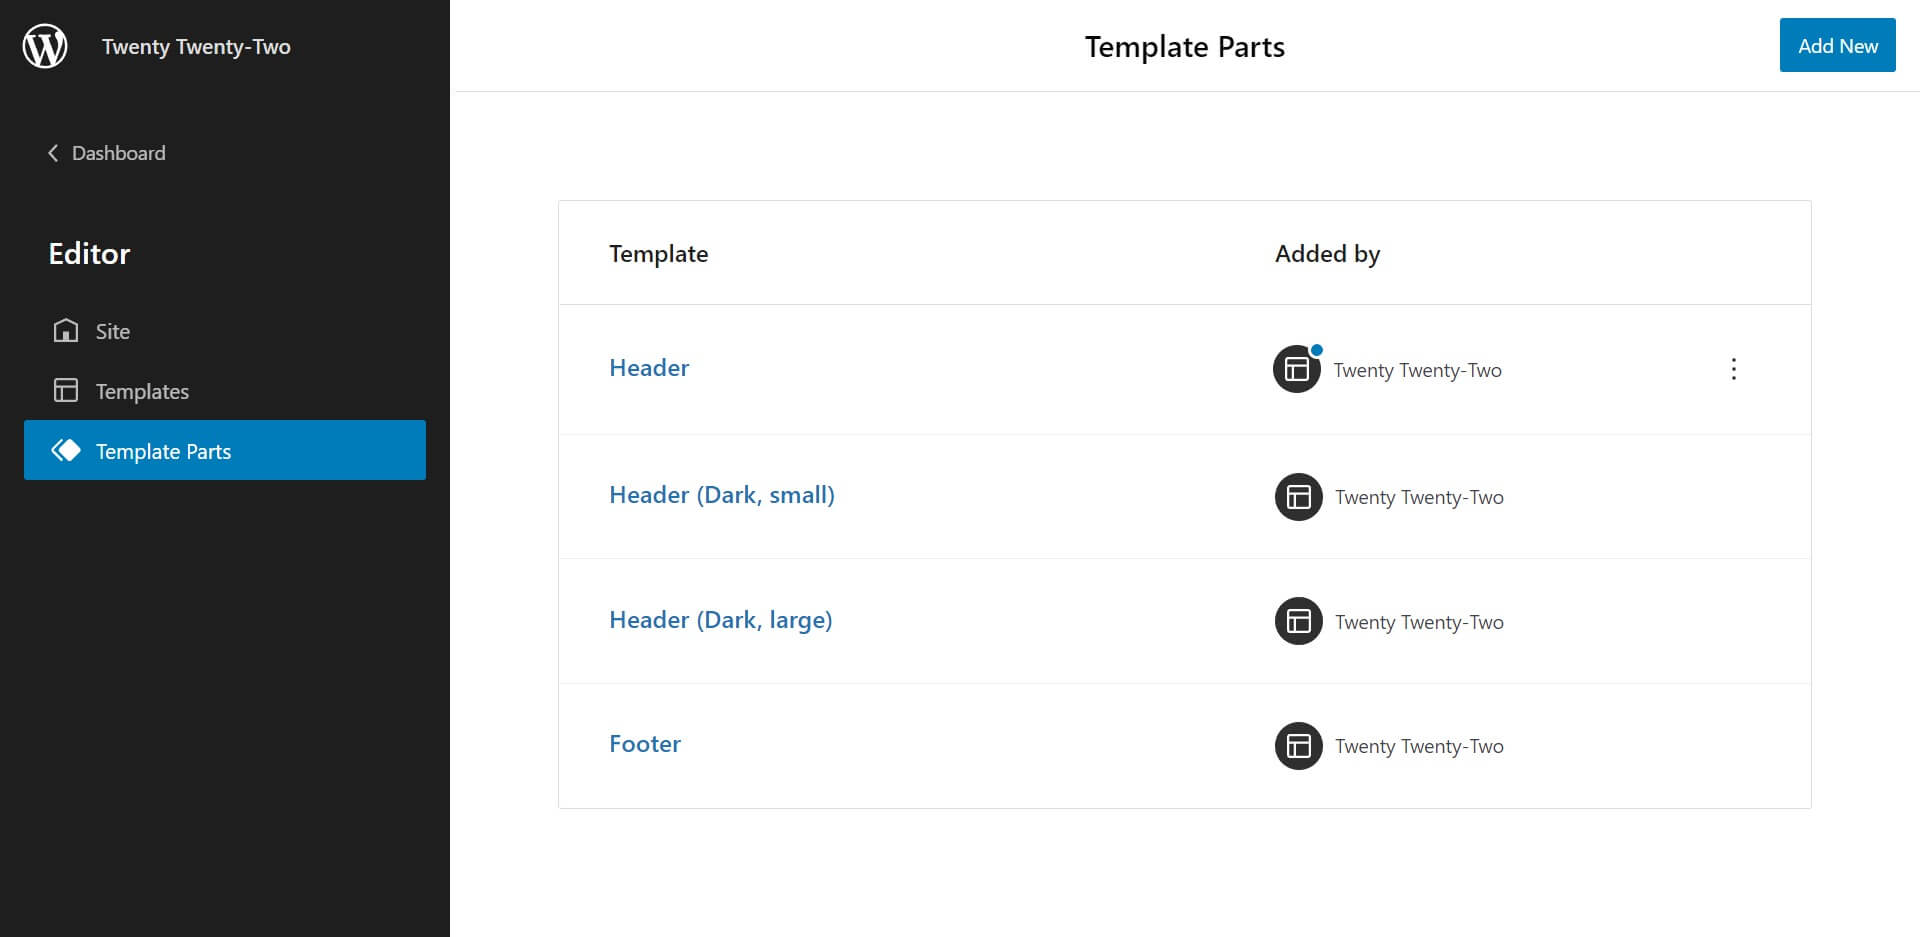 Template parts interface in the WordPress Full Site Editor